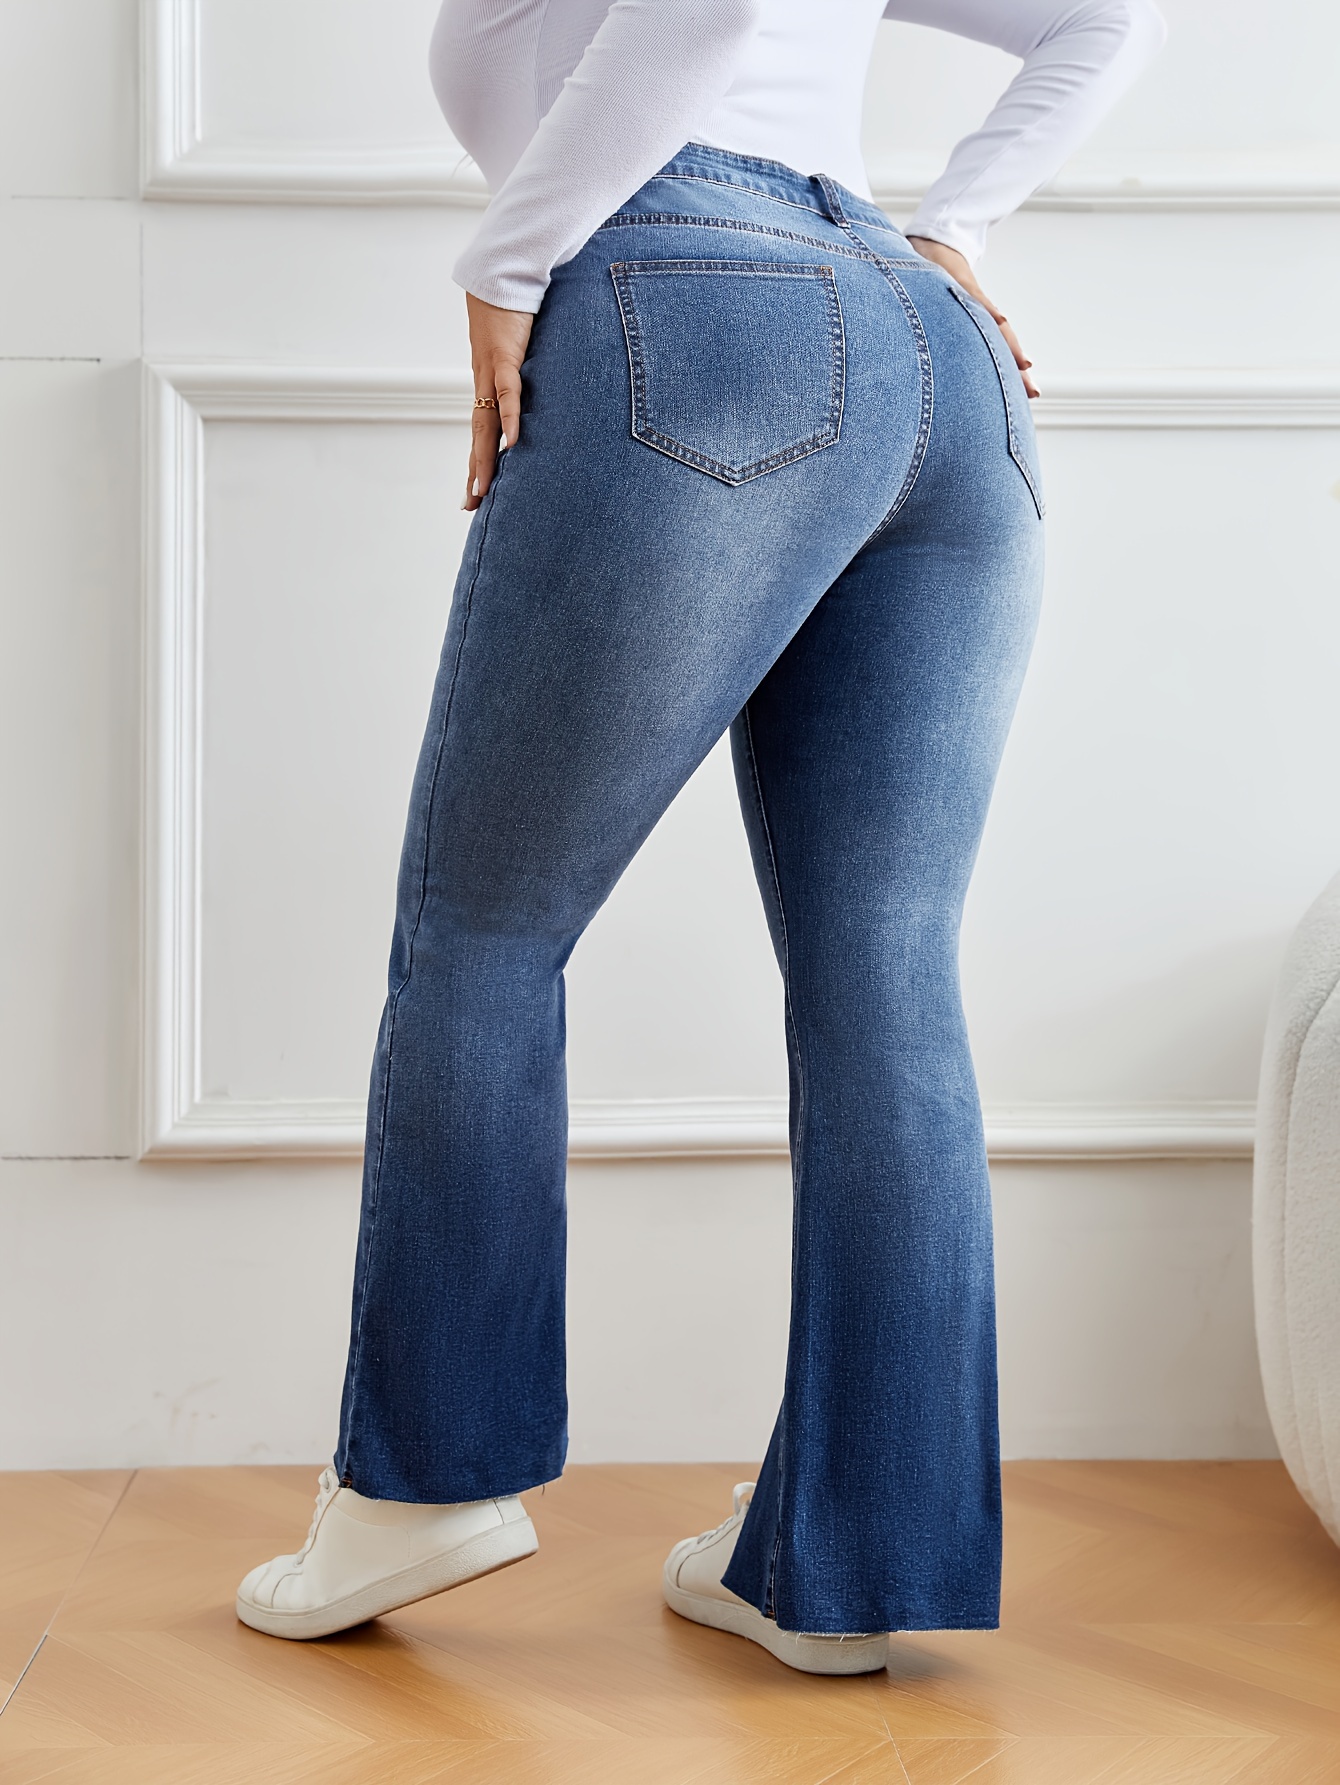 Plus High Waisted Split Detail Flare Jeans